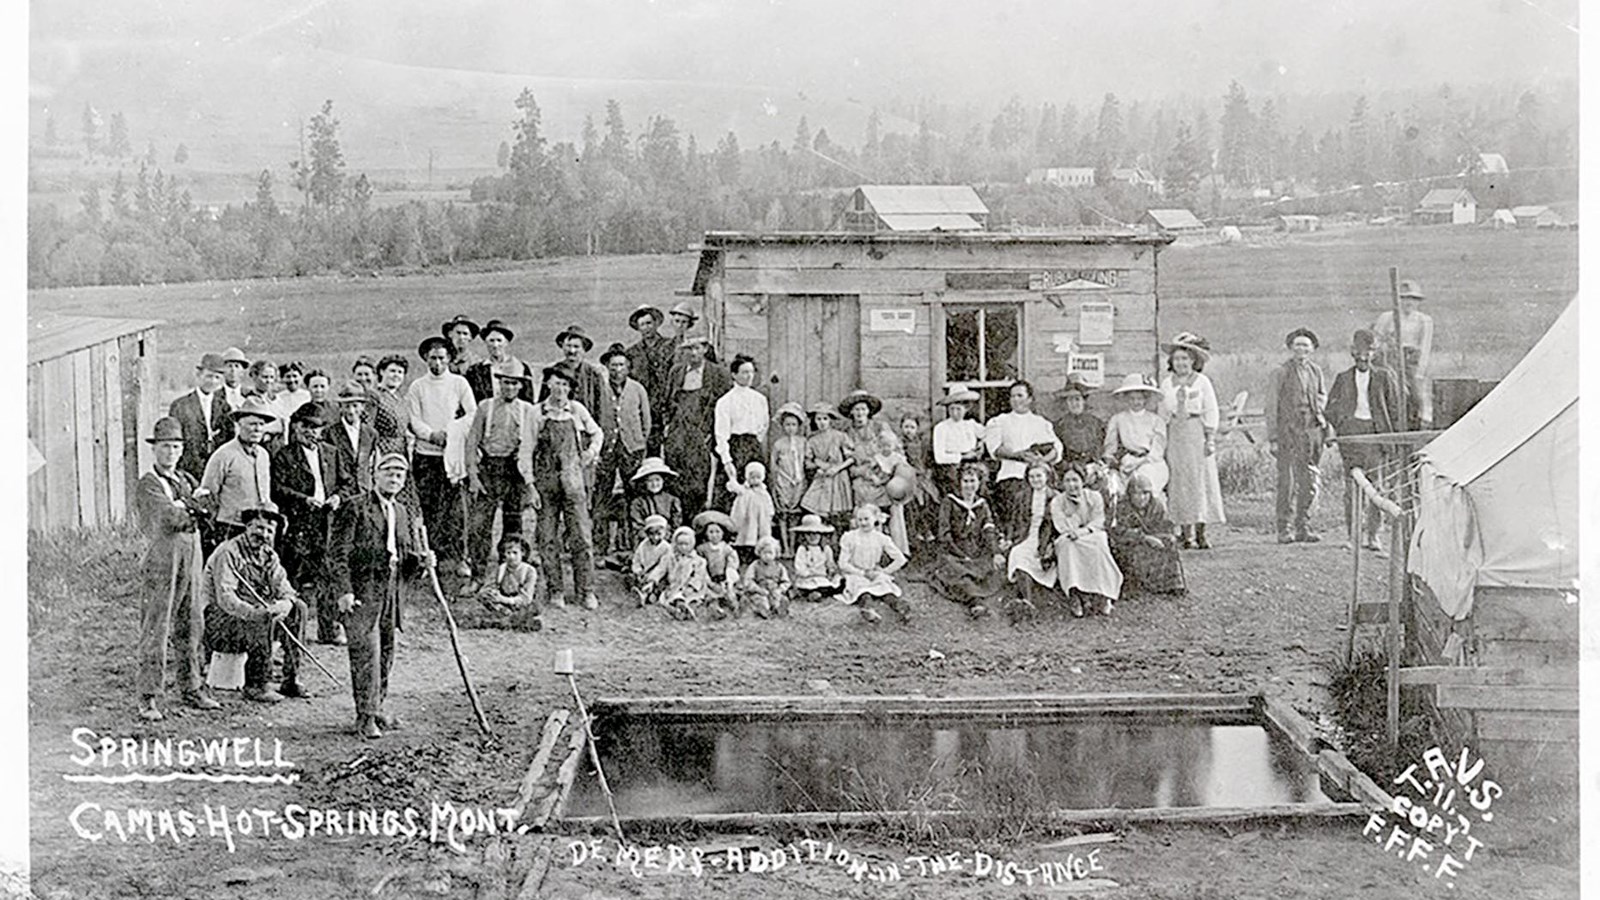 Photograph of many individuals standing in front of a small hut. A hot spring is in the foreground.